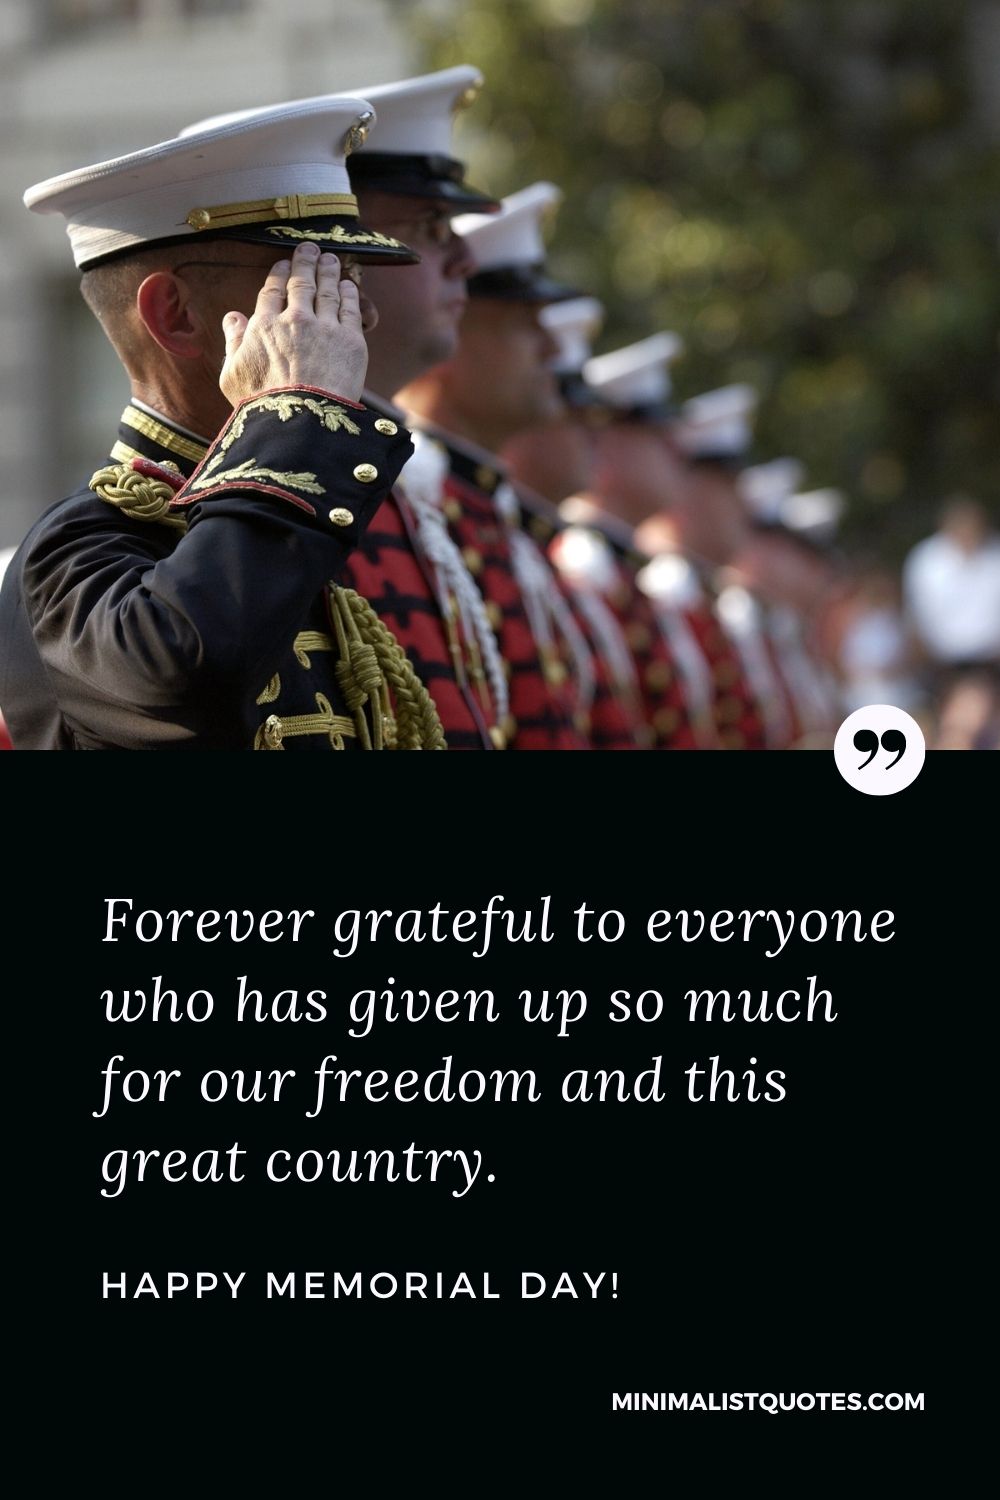 Memorial Day wishes, quotes & messages with images: Forever grateful to everyone who has given up so much for our freedom and this great country. Happy Memorial Day!